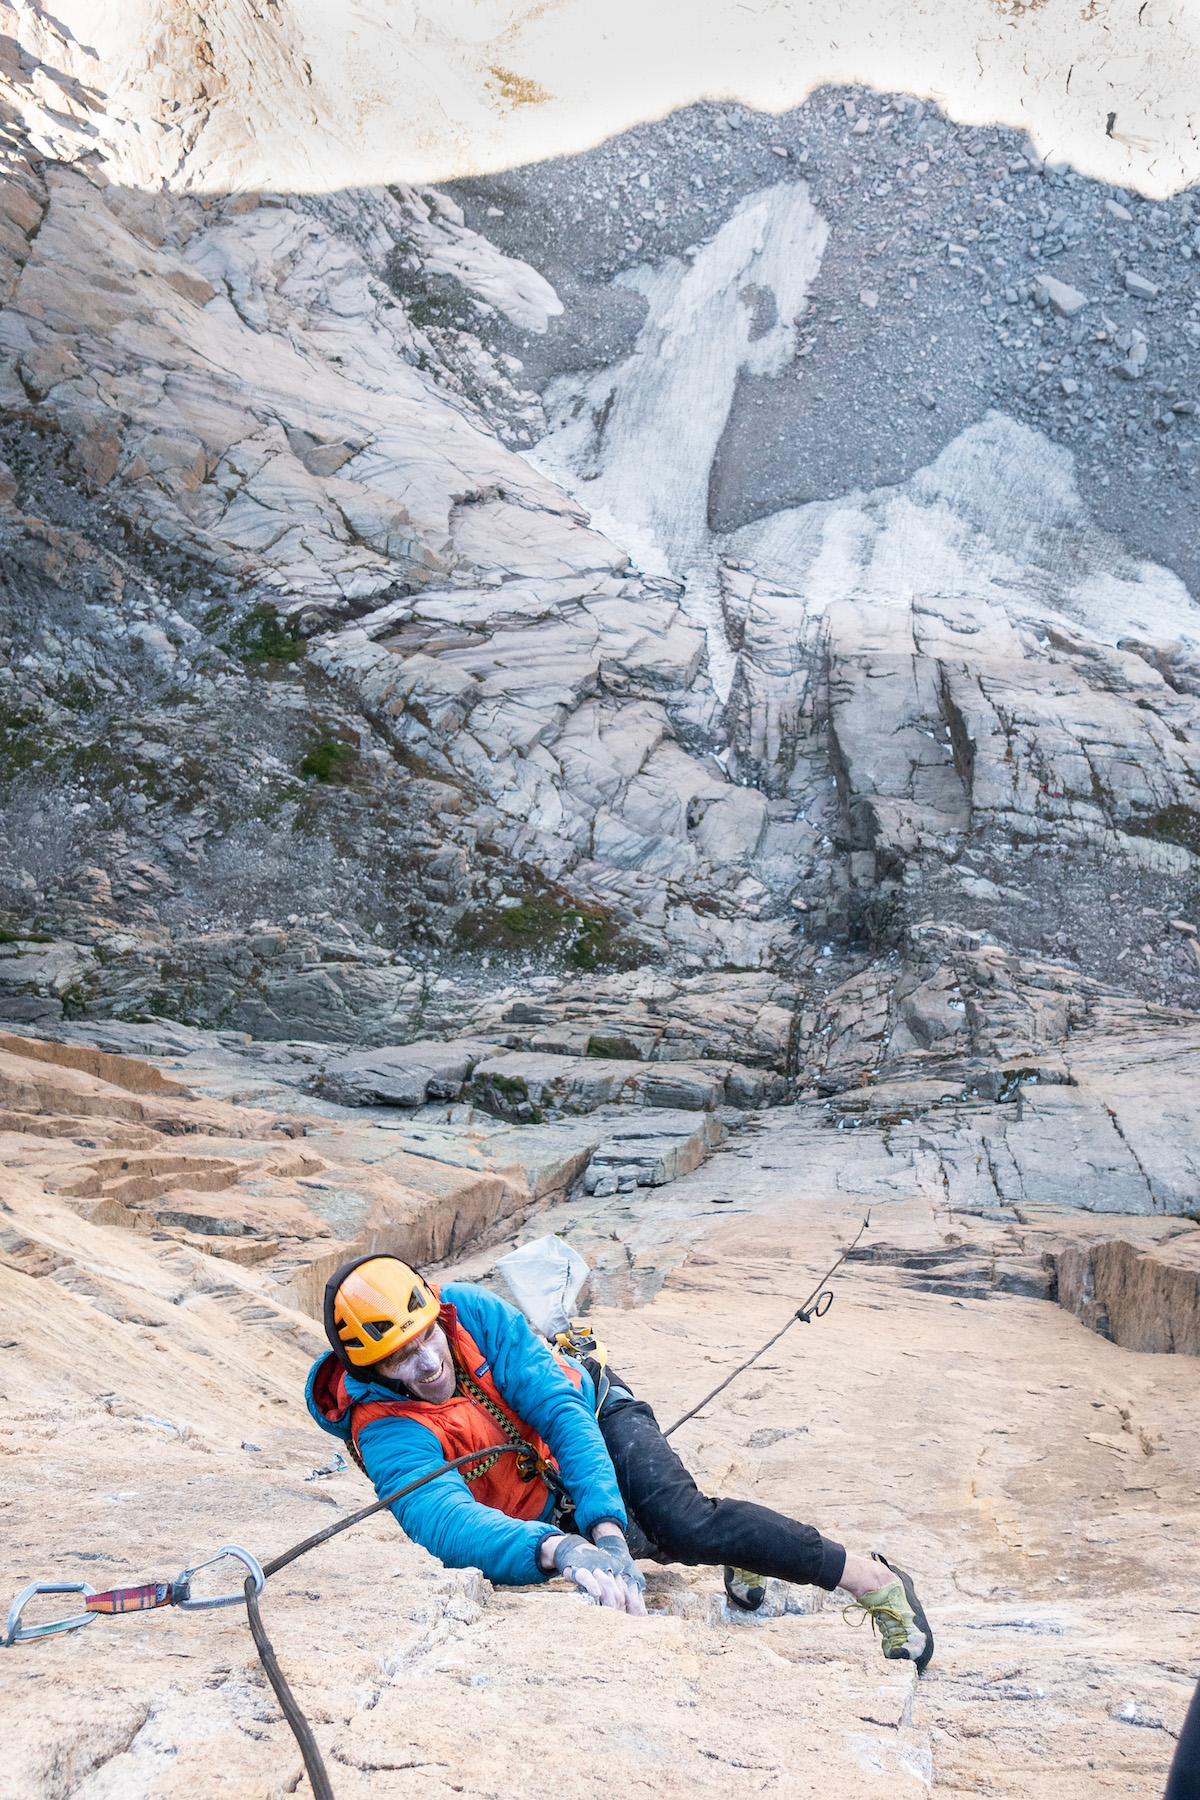 Miller toprope soloing on Gamblers Fallacy. [Photo] Chris Weidner